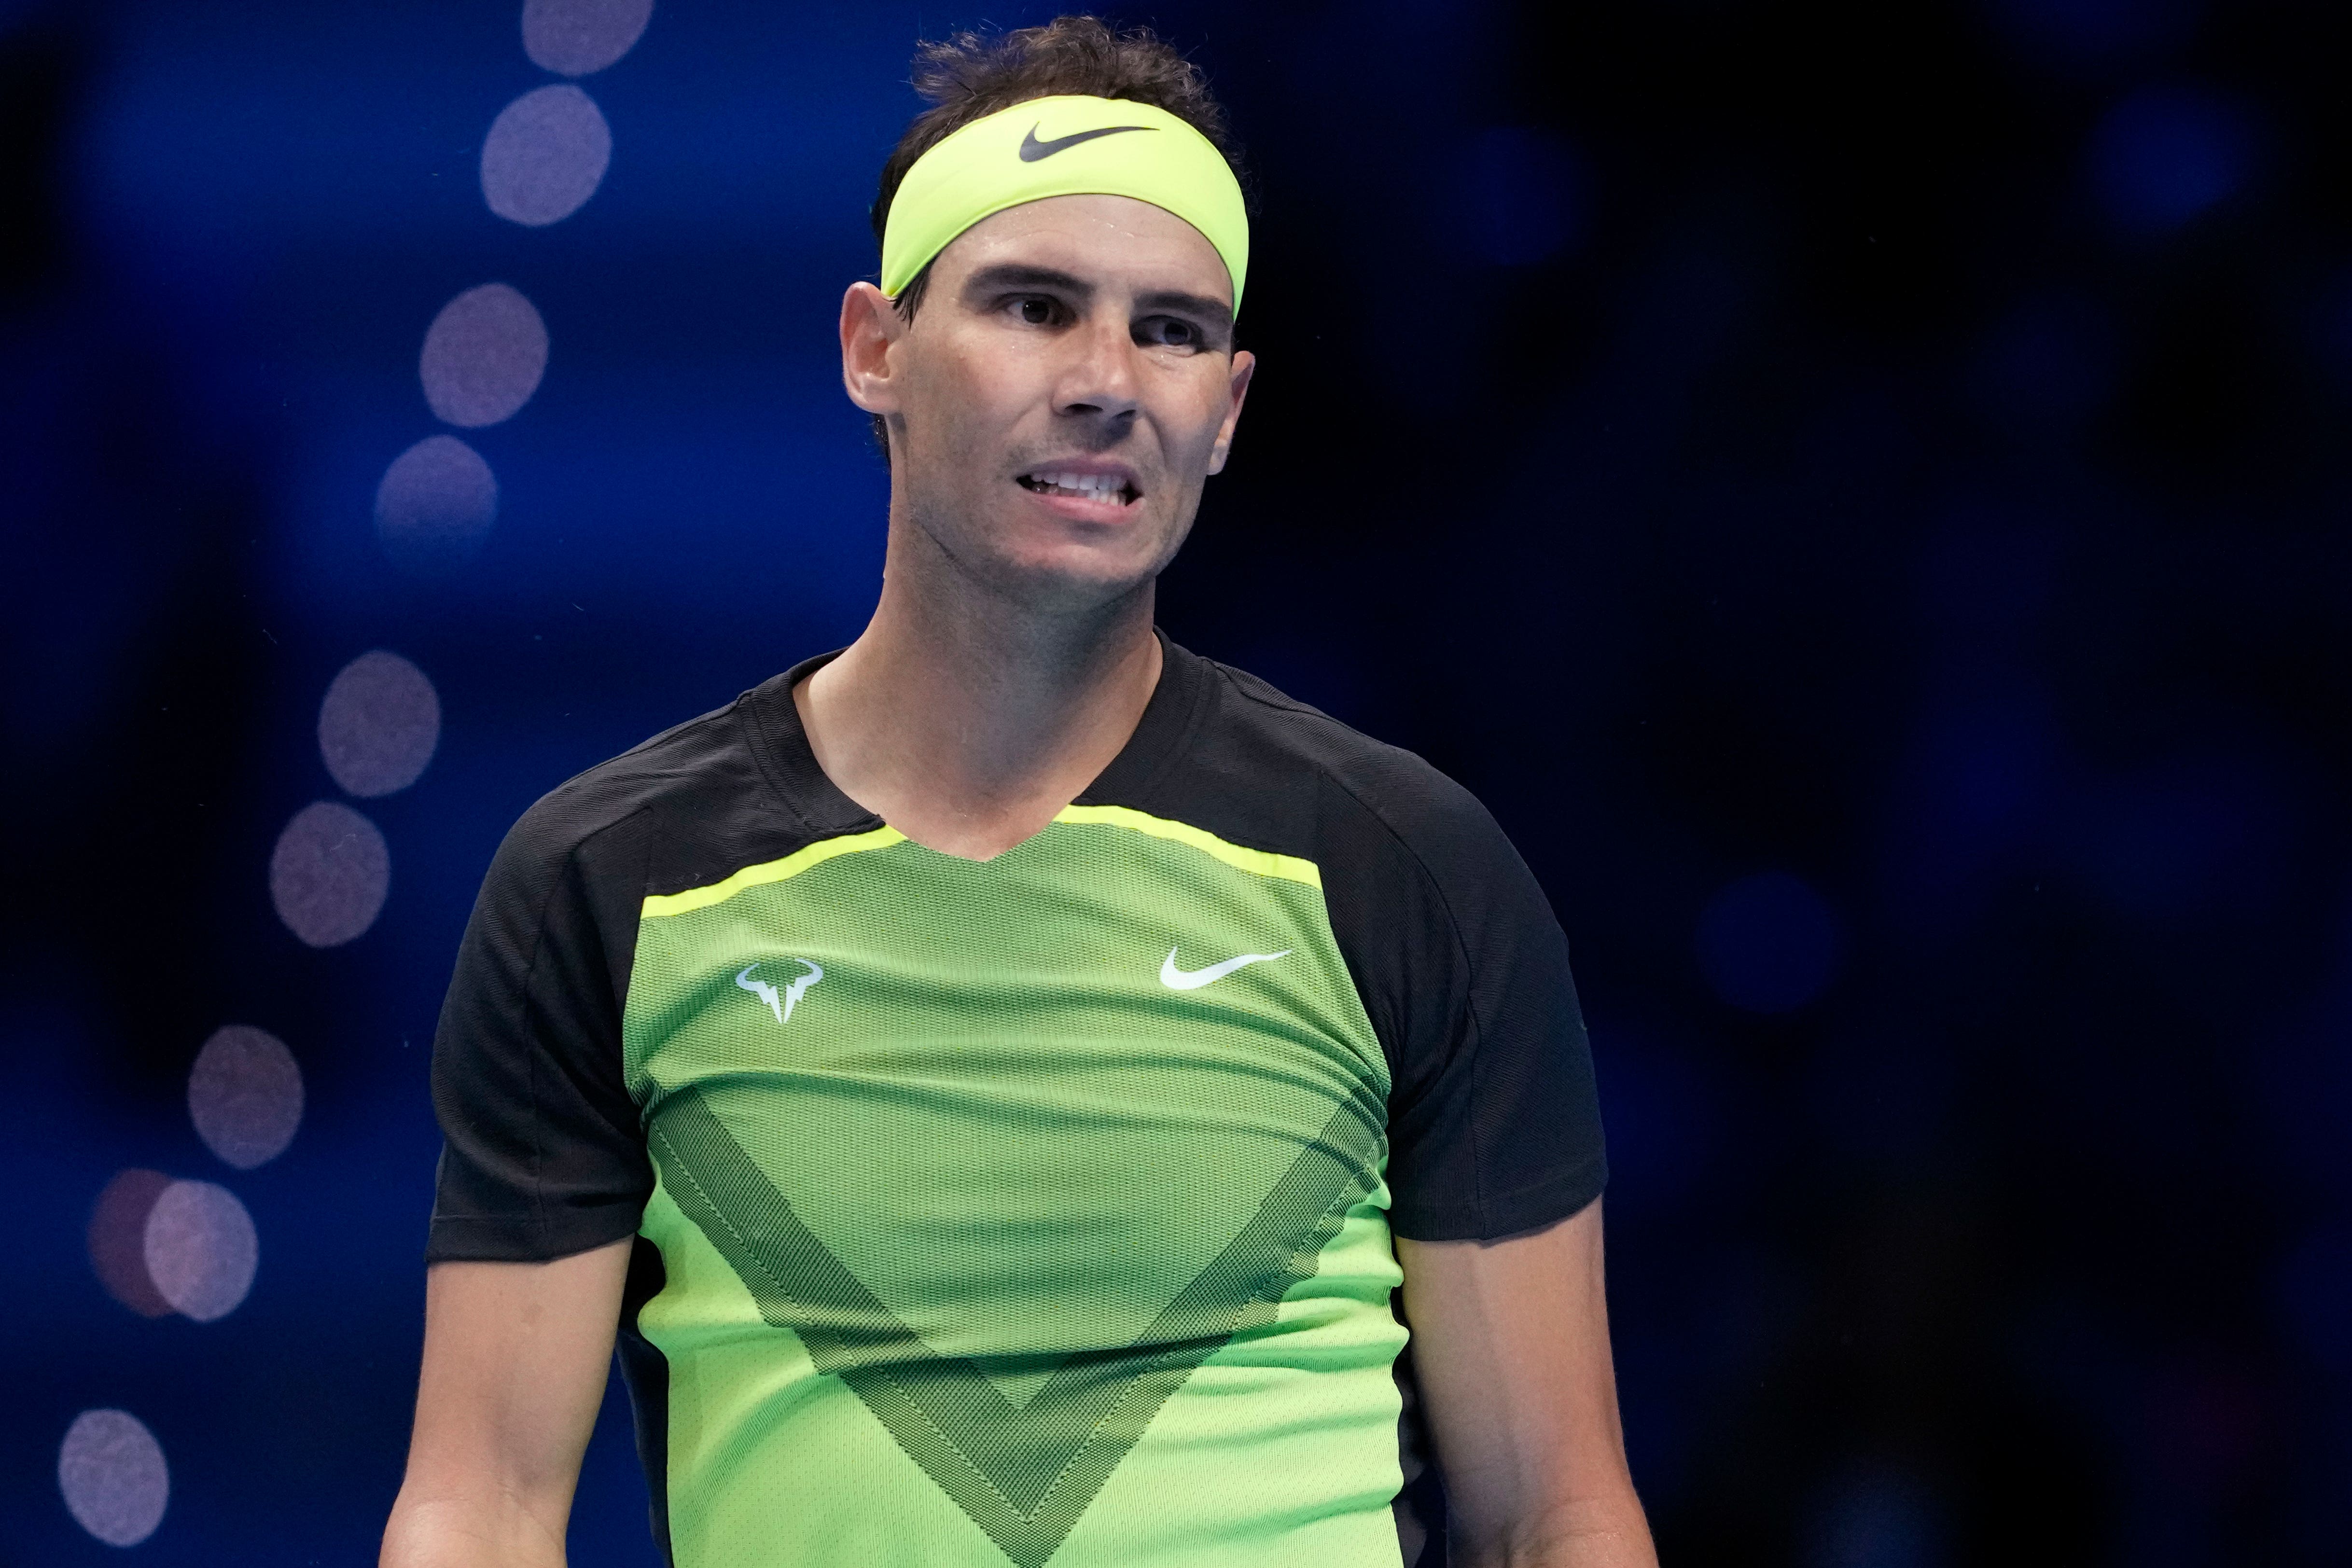 An ATP Finals trophy has long eluded Rafael Nadal